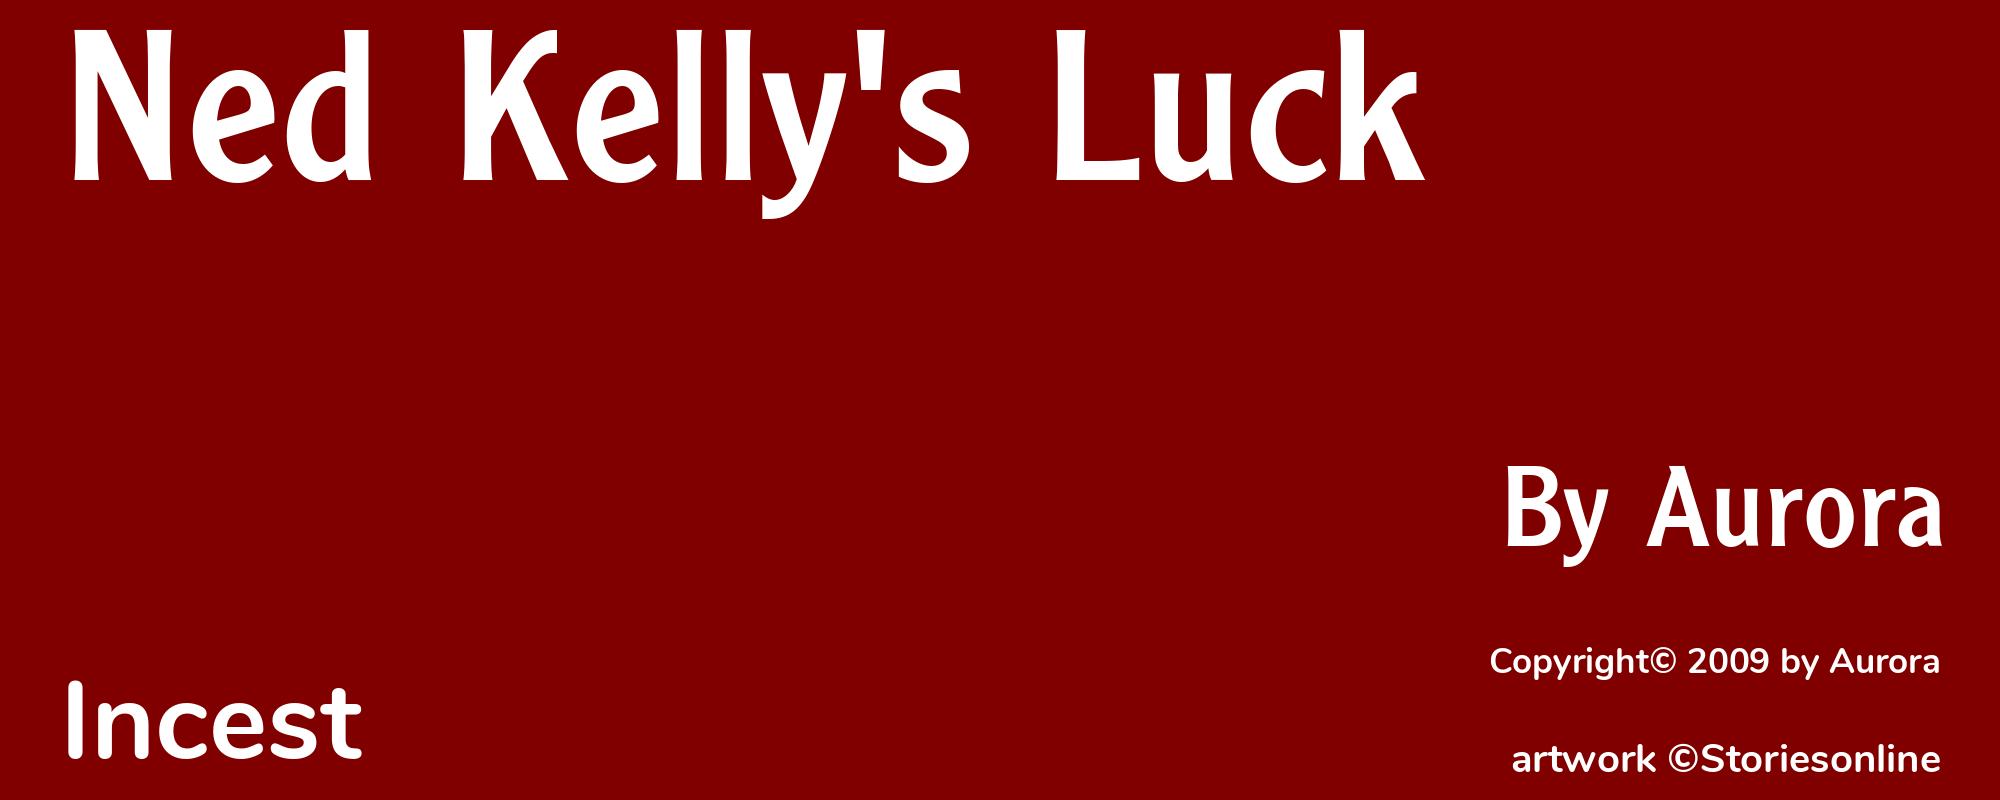 Ned Kelly's Luck - Cover